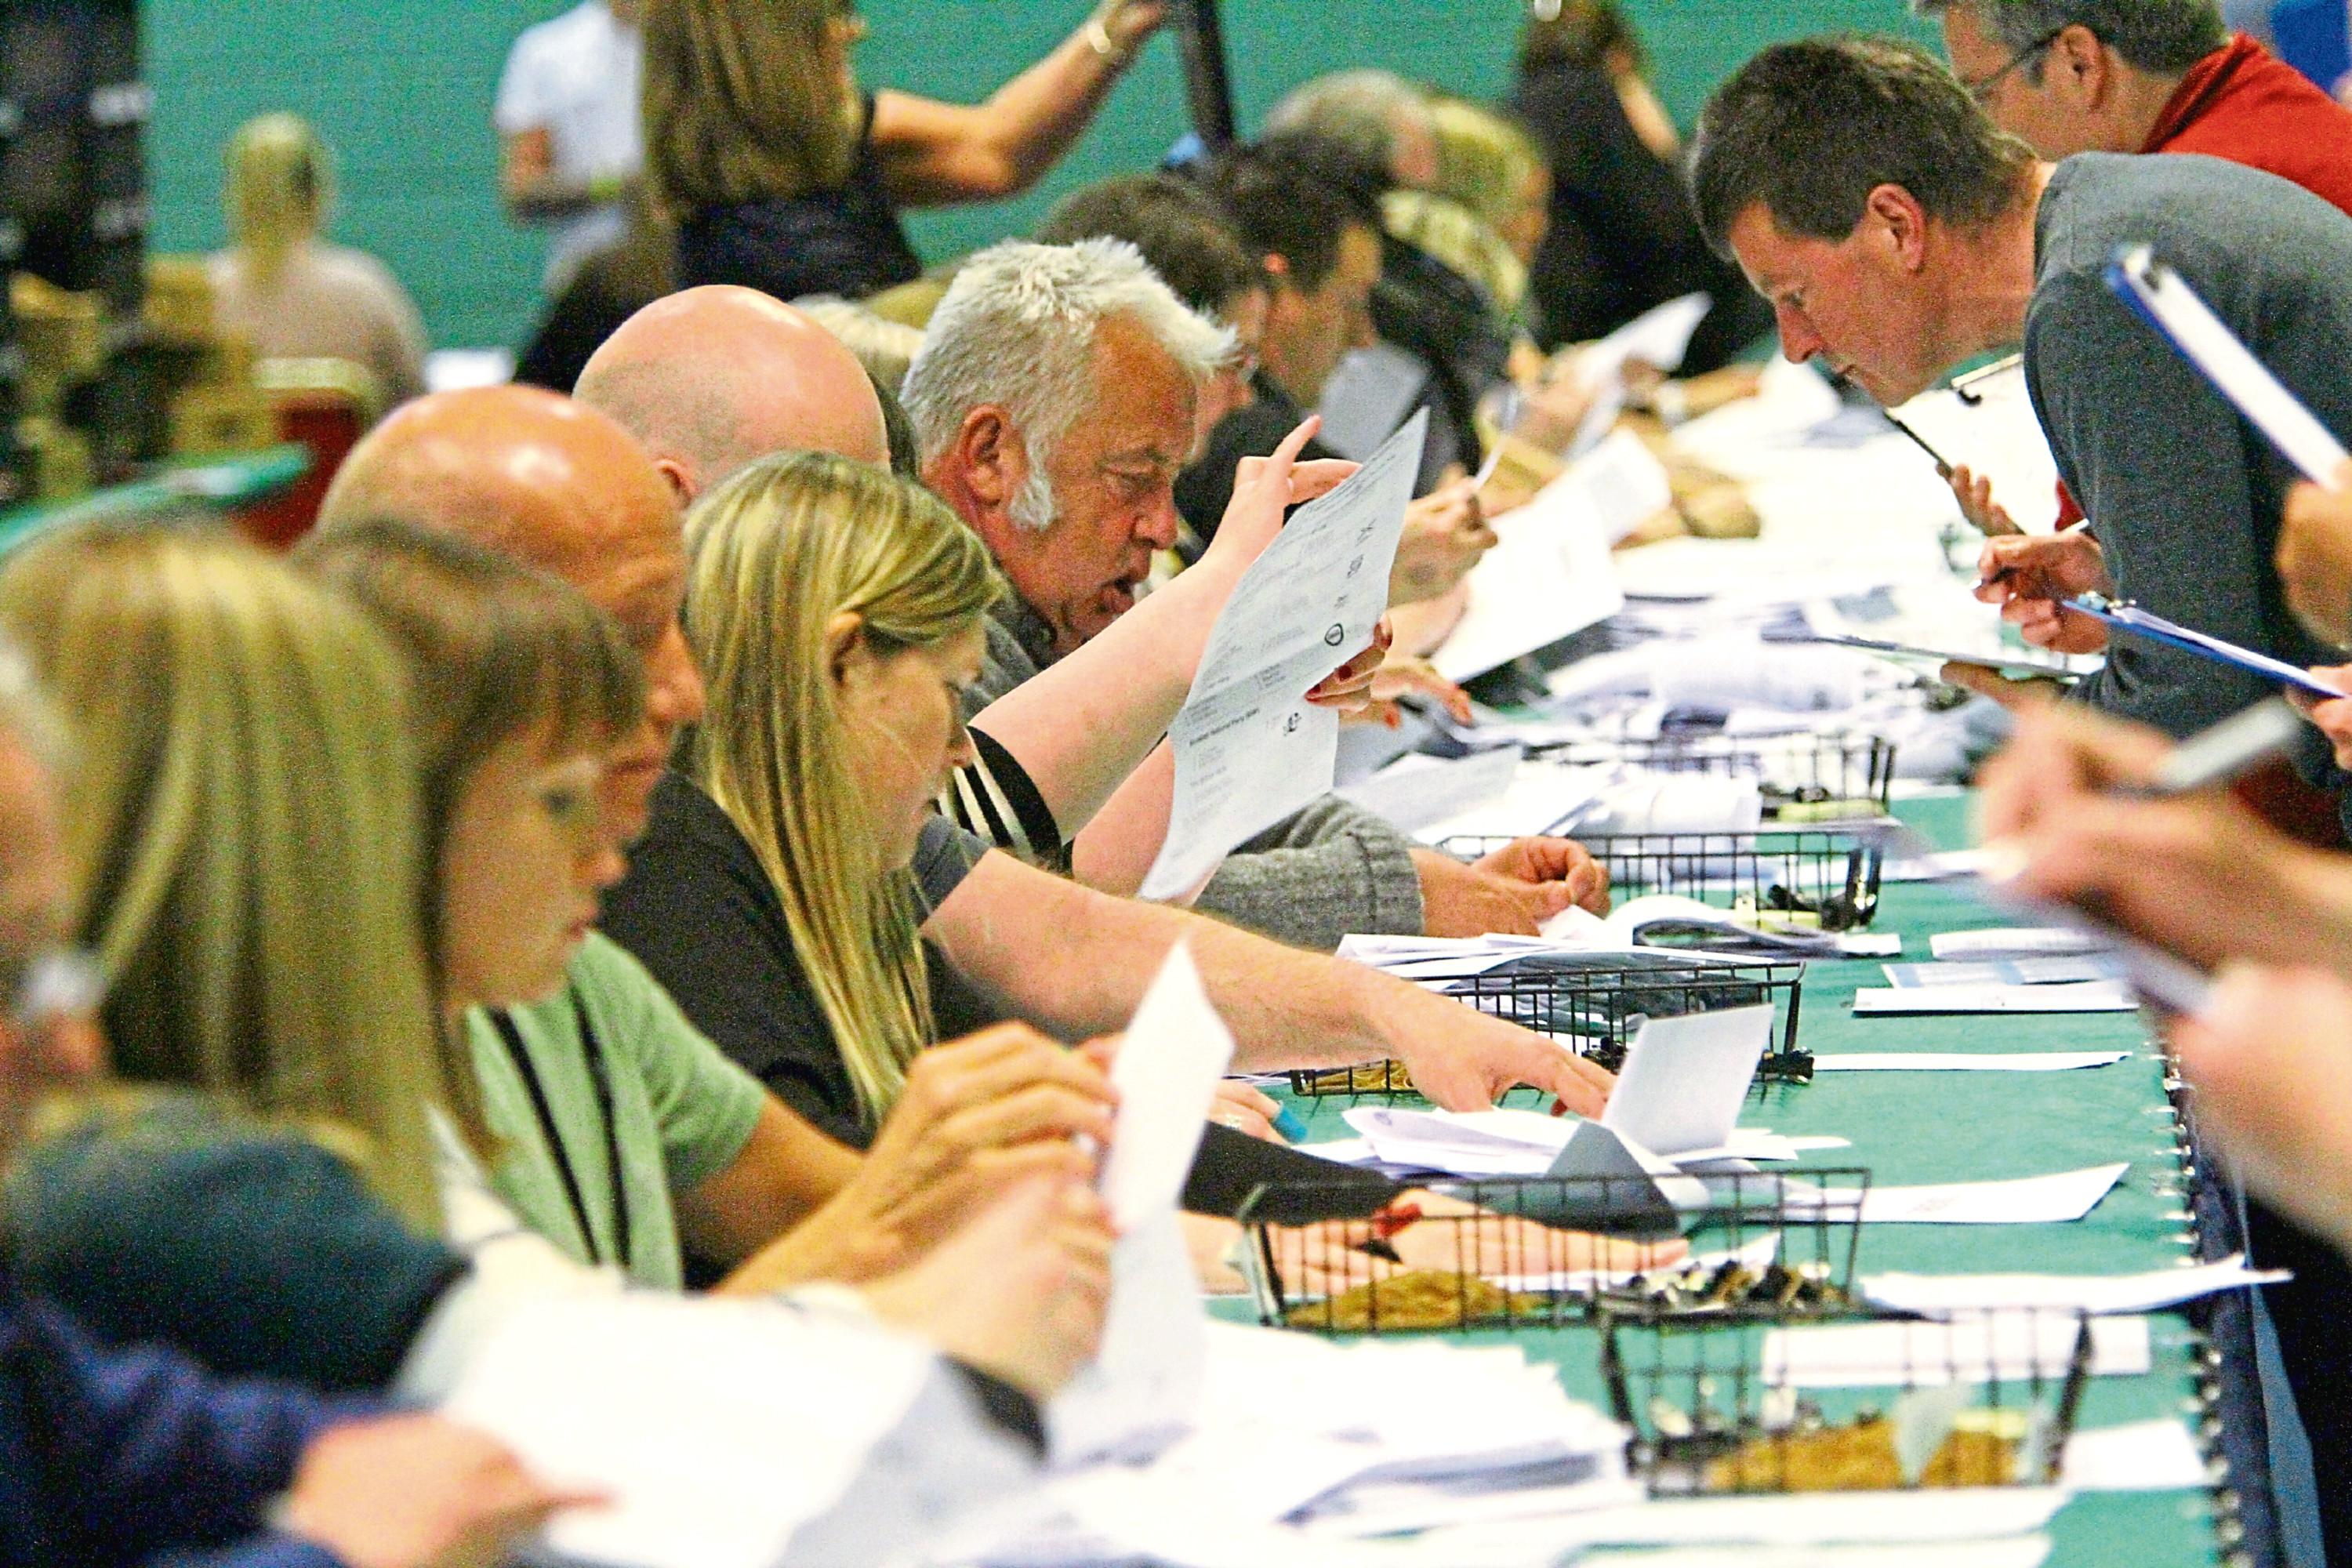 The European election count underway at Fintry Primary School, Dundee, in May 2019.